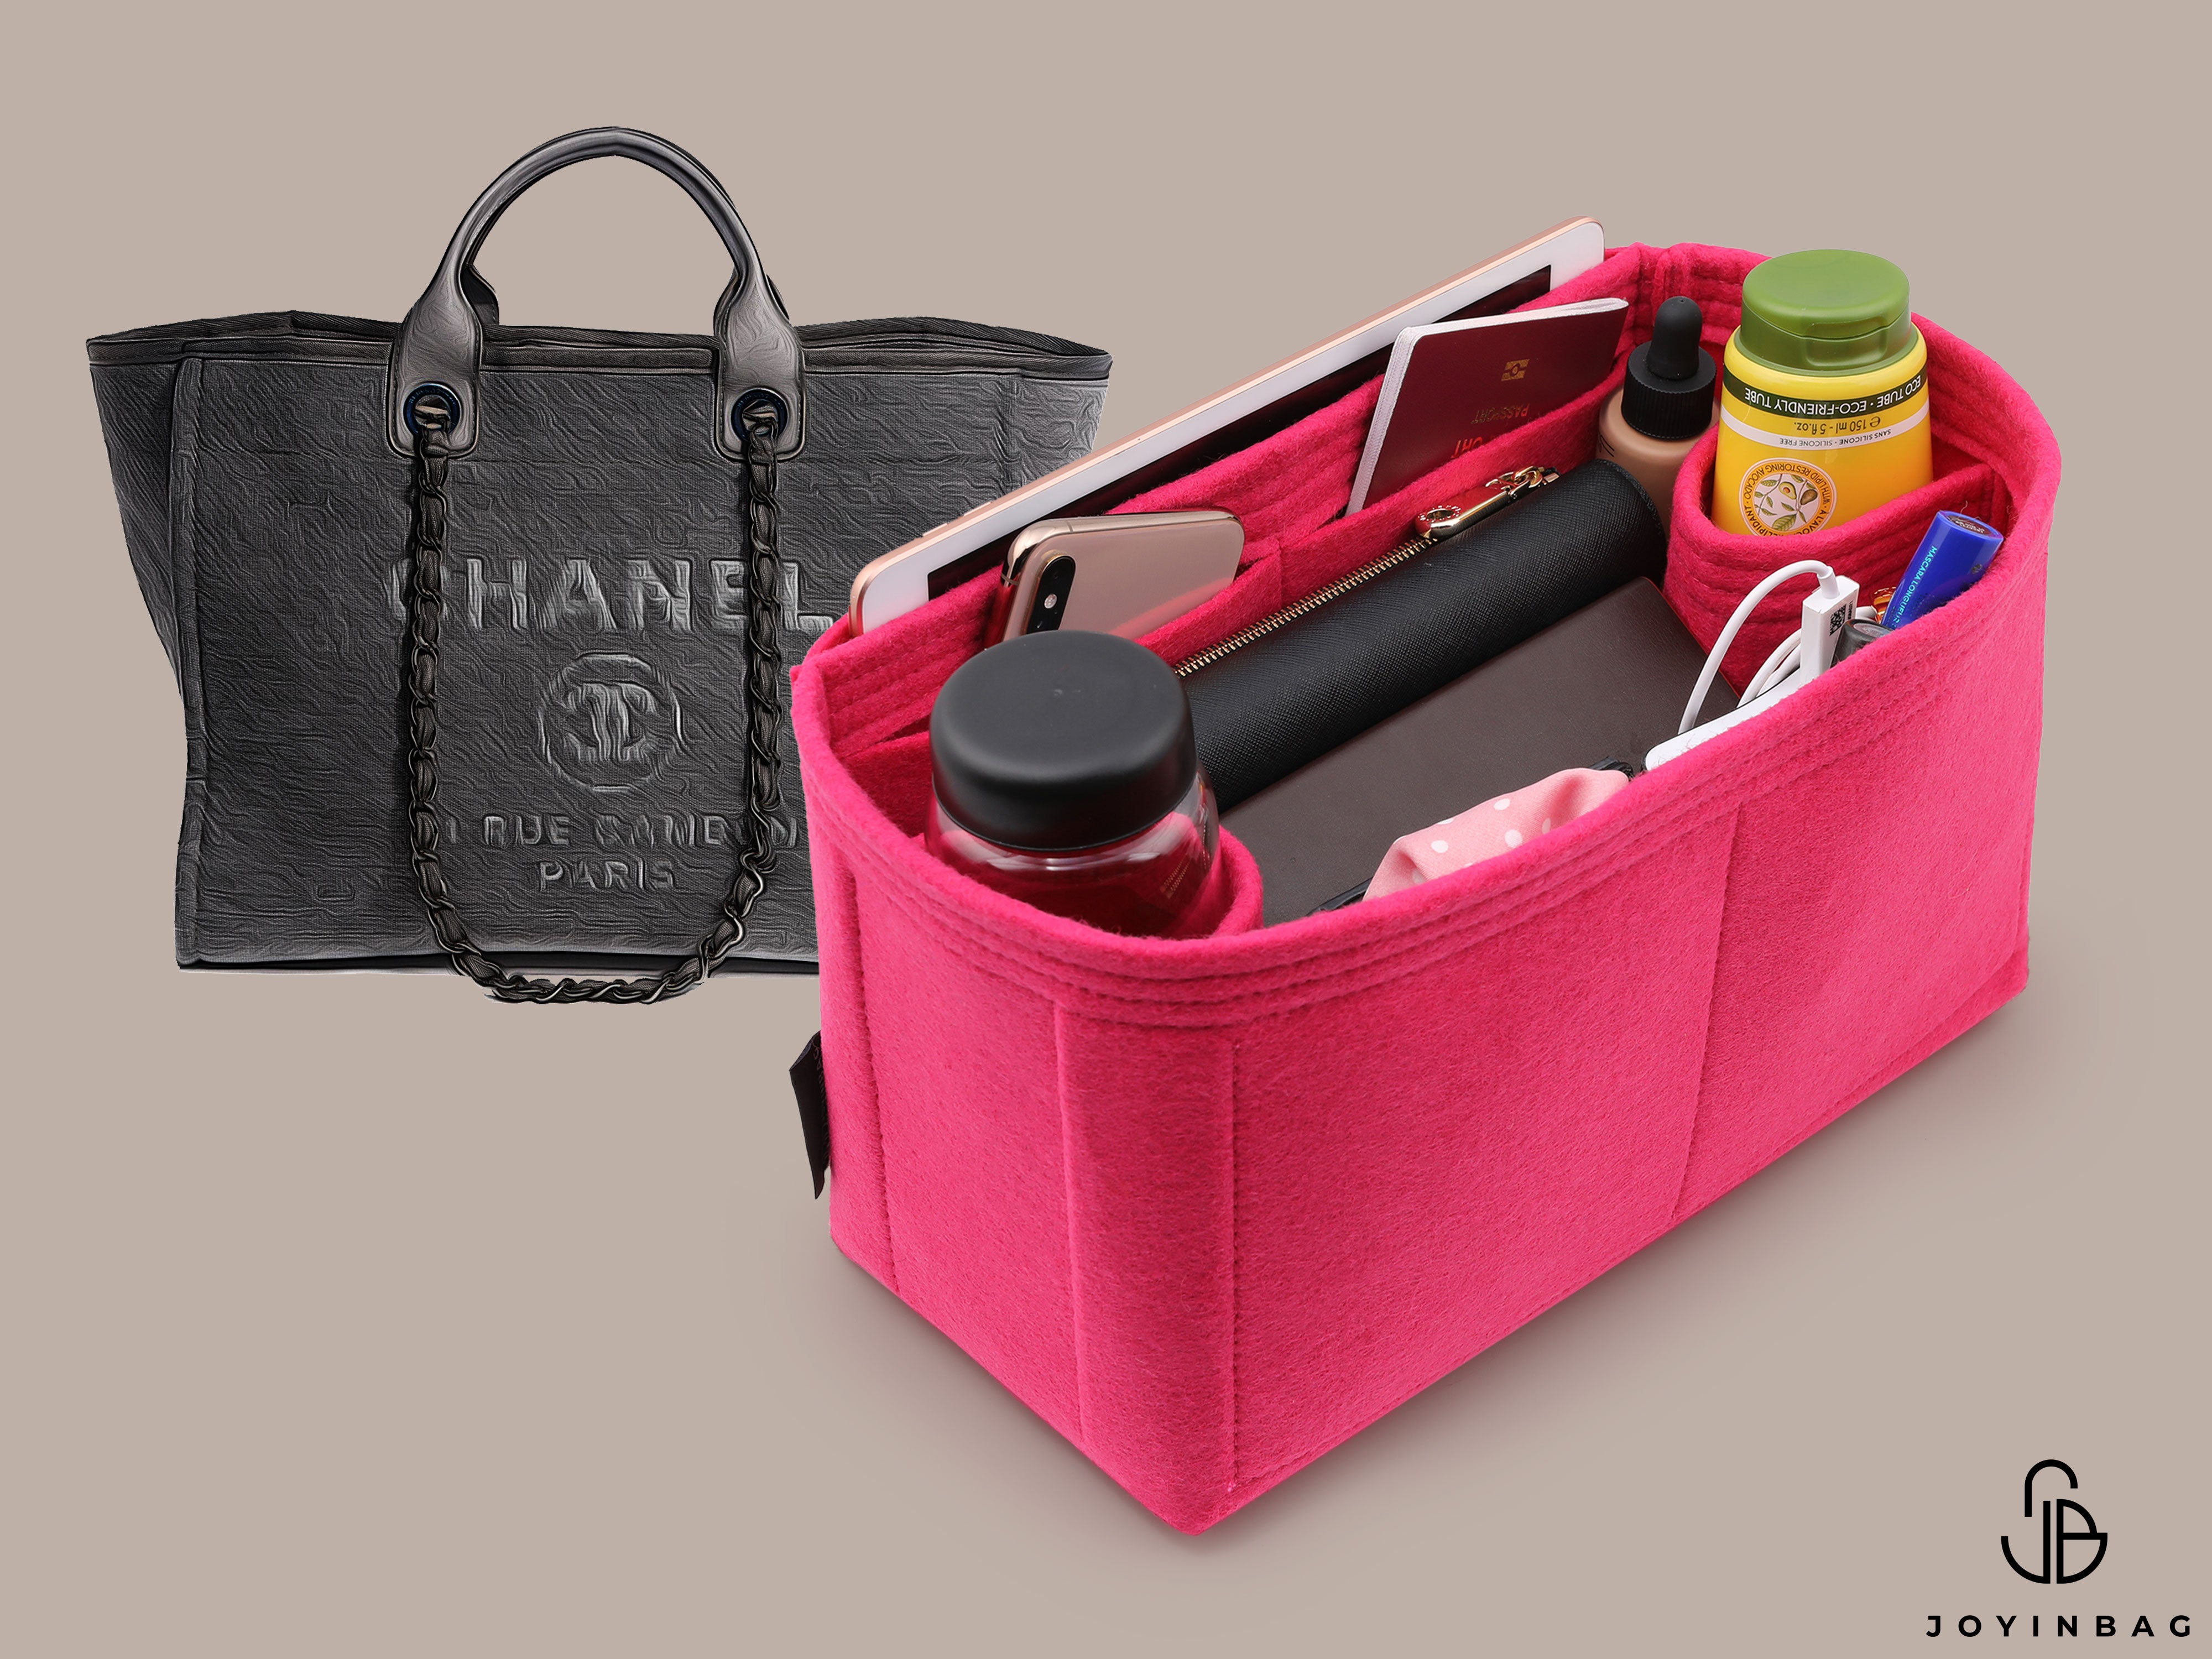 Tote Bag Organizer For Chanel Deauville Canvas Large Bag with Double B